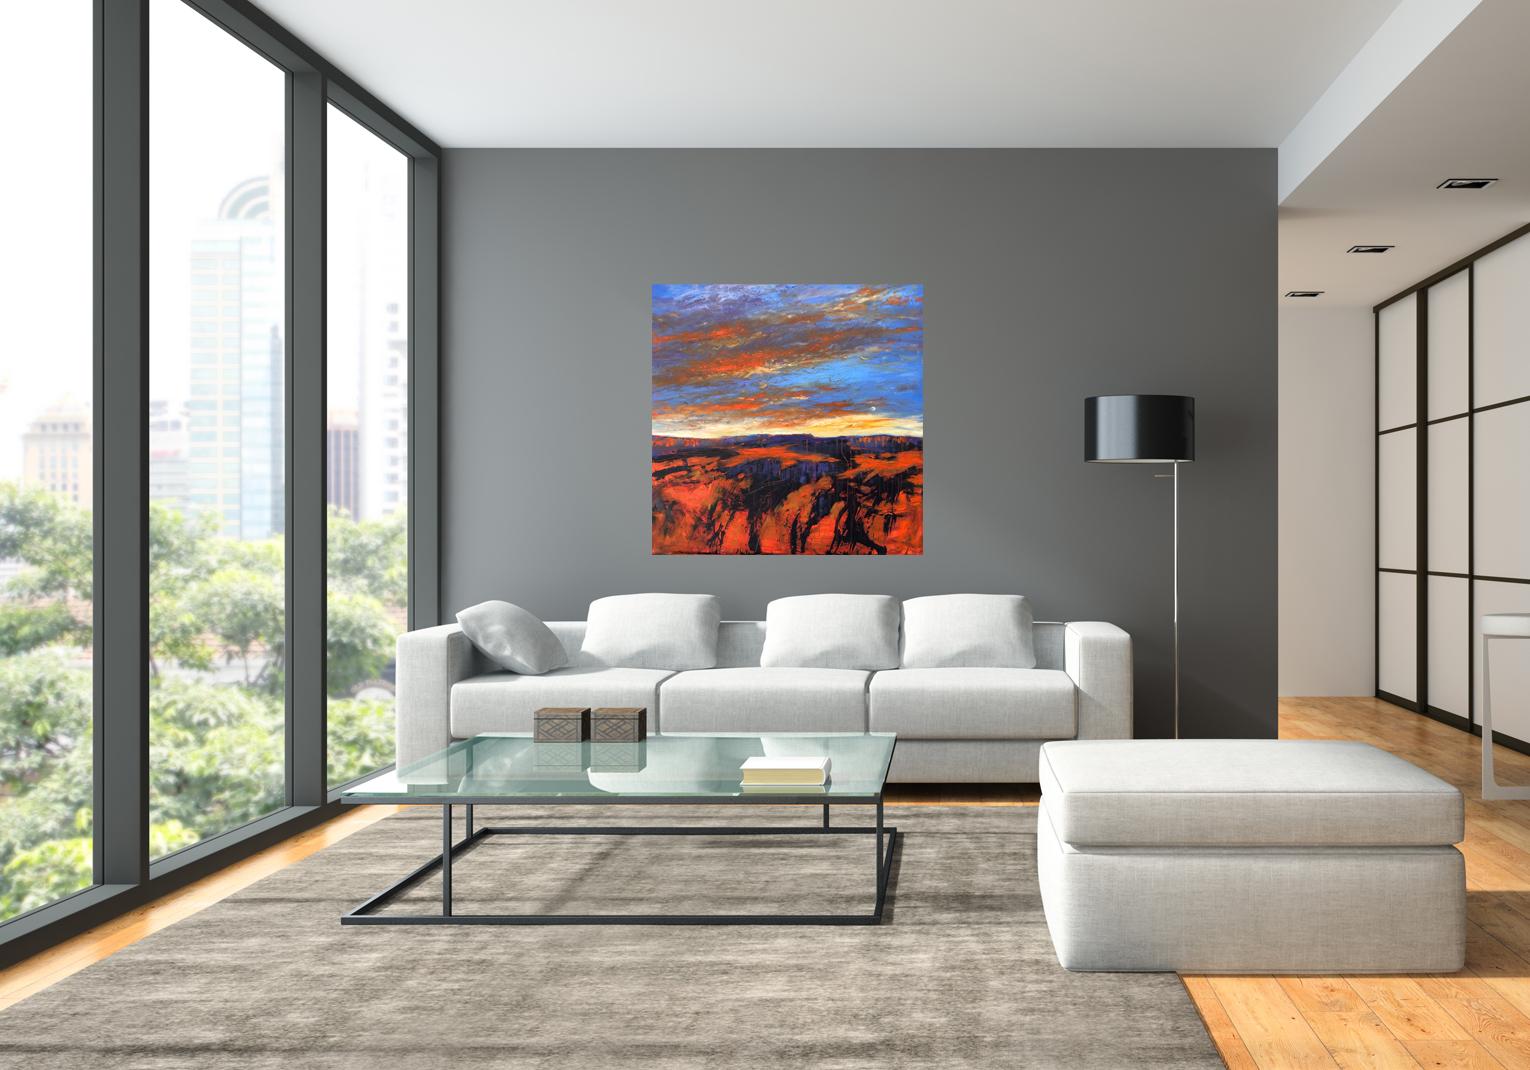 “Desert Moonrise” by Catherine Picard-Gibbs is a dynamic desert scene, inspired by time spent by the artist exploring southwestern regions of the United States. This gestural oil painting on gallery style canvas is painted in a palette of oranges,